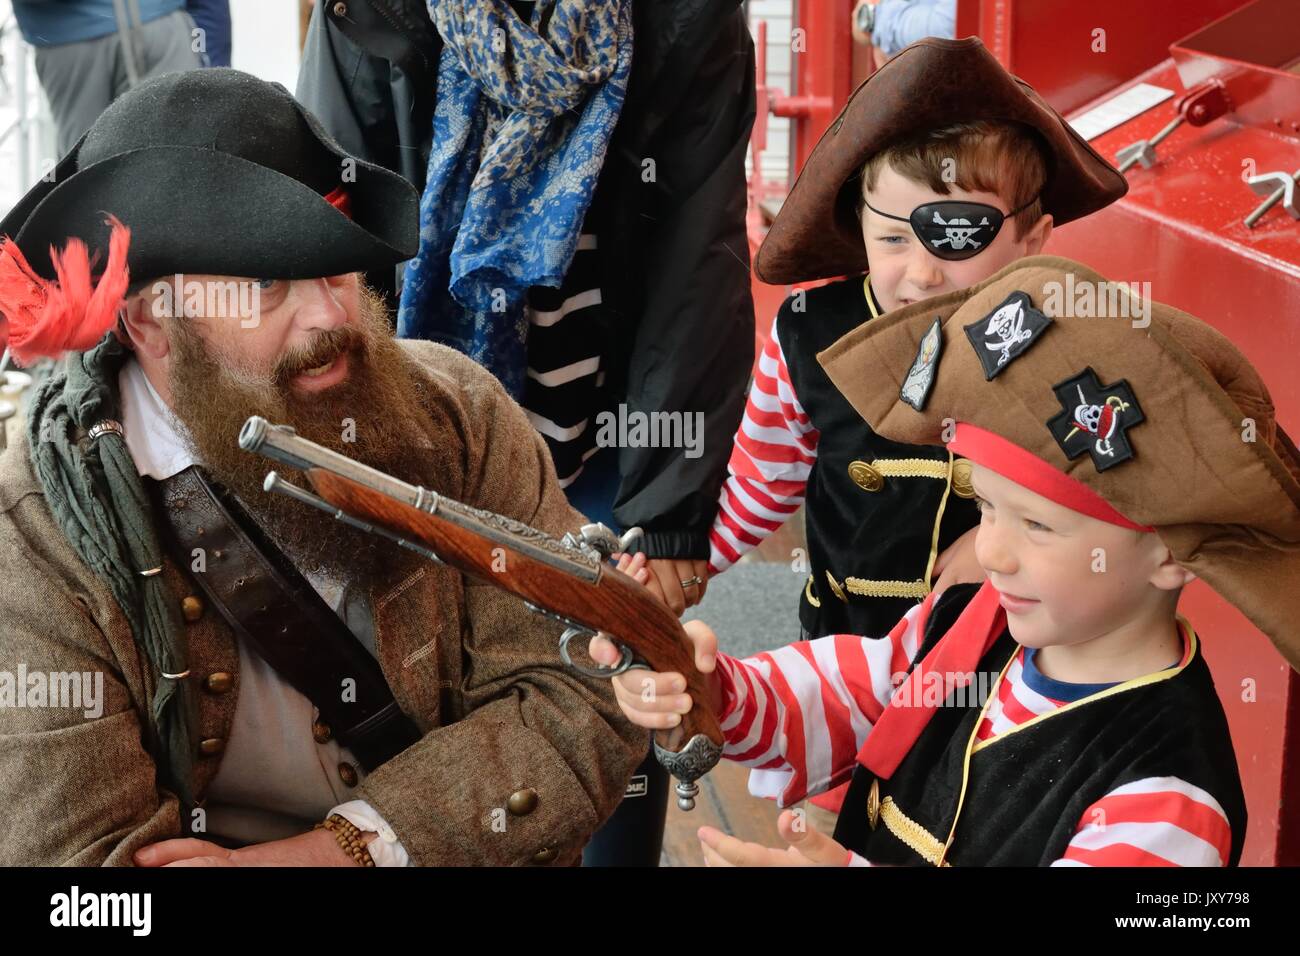 Children dress up as pirates for a trip onboard a boat in Scotland, UK Stock Photo